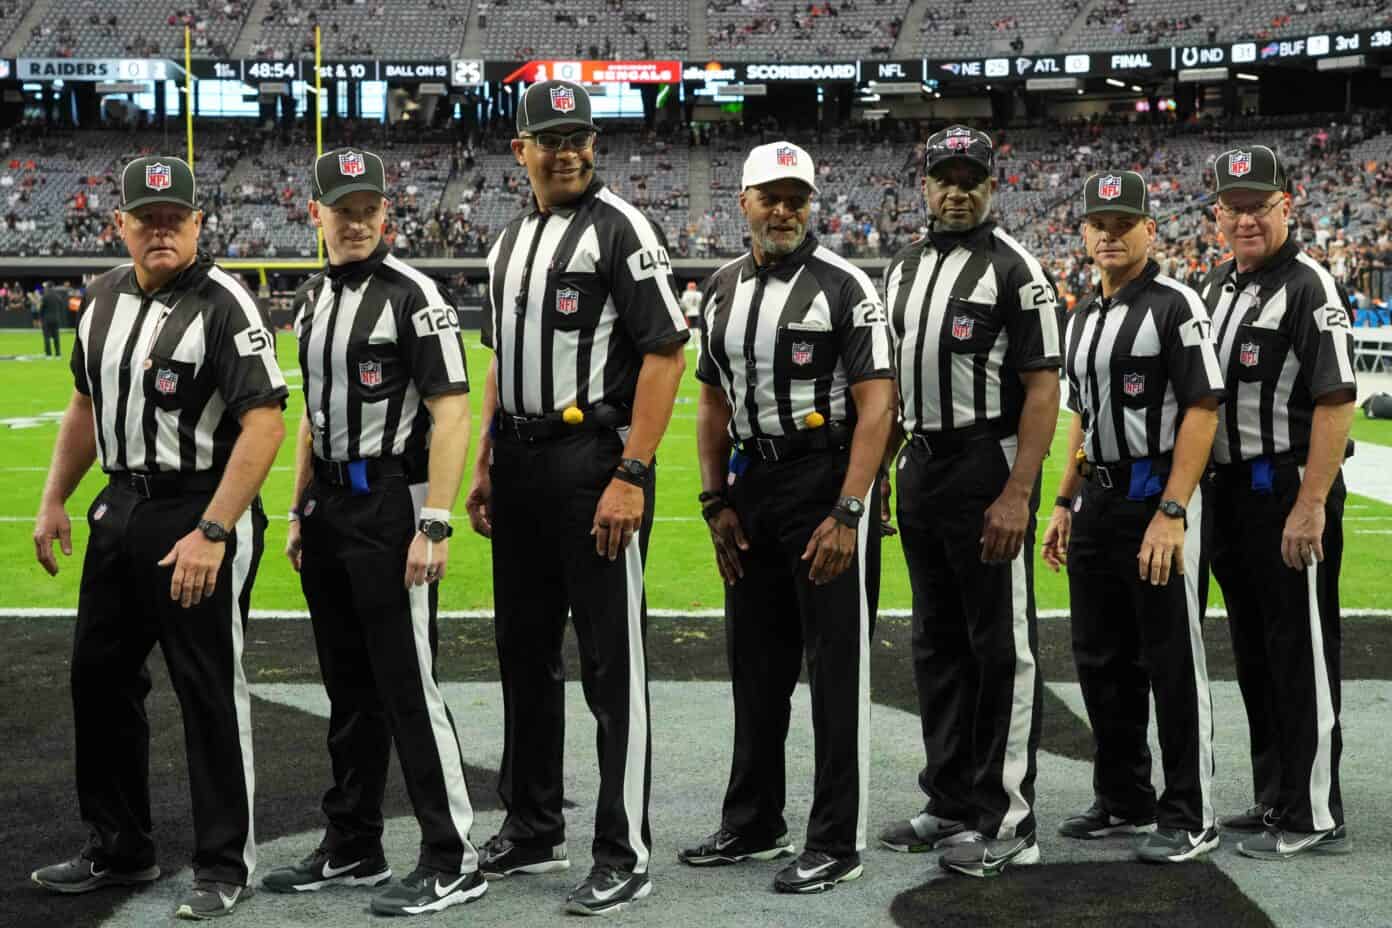 NFL Referee Assignments Week 12 Refs assigned for each game this week